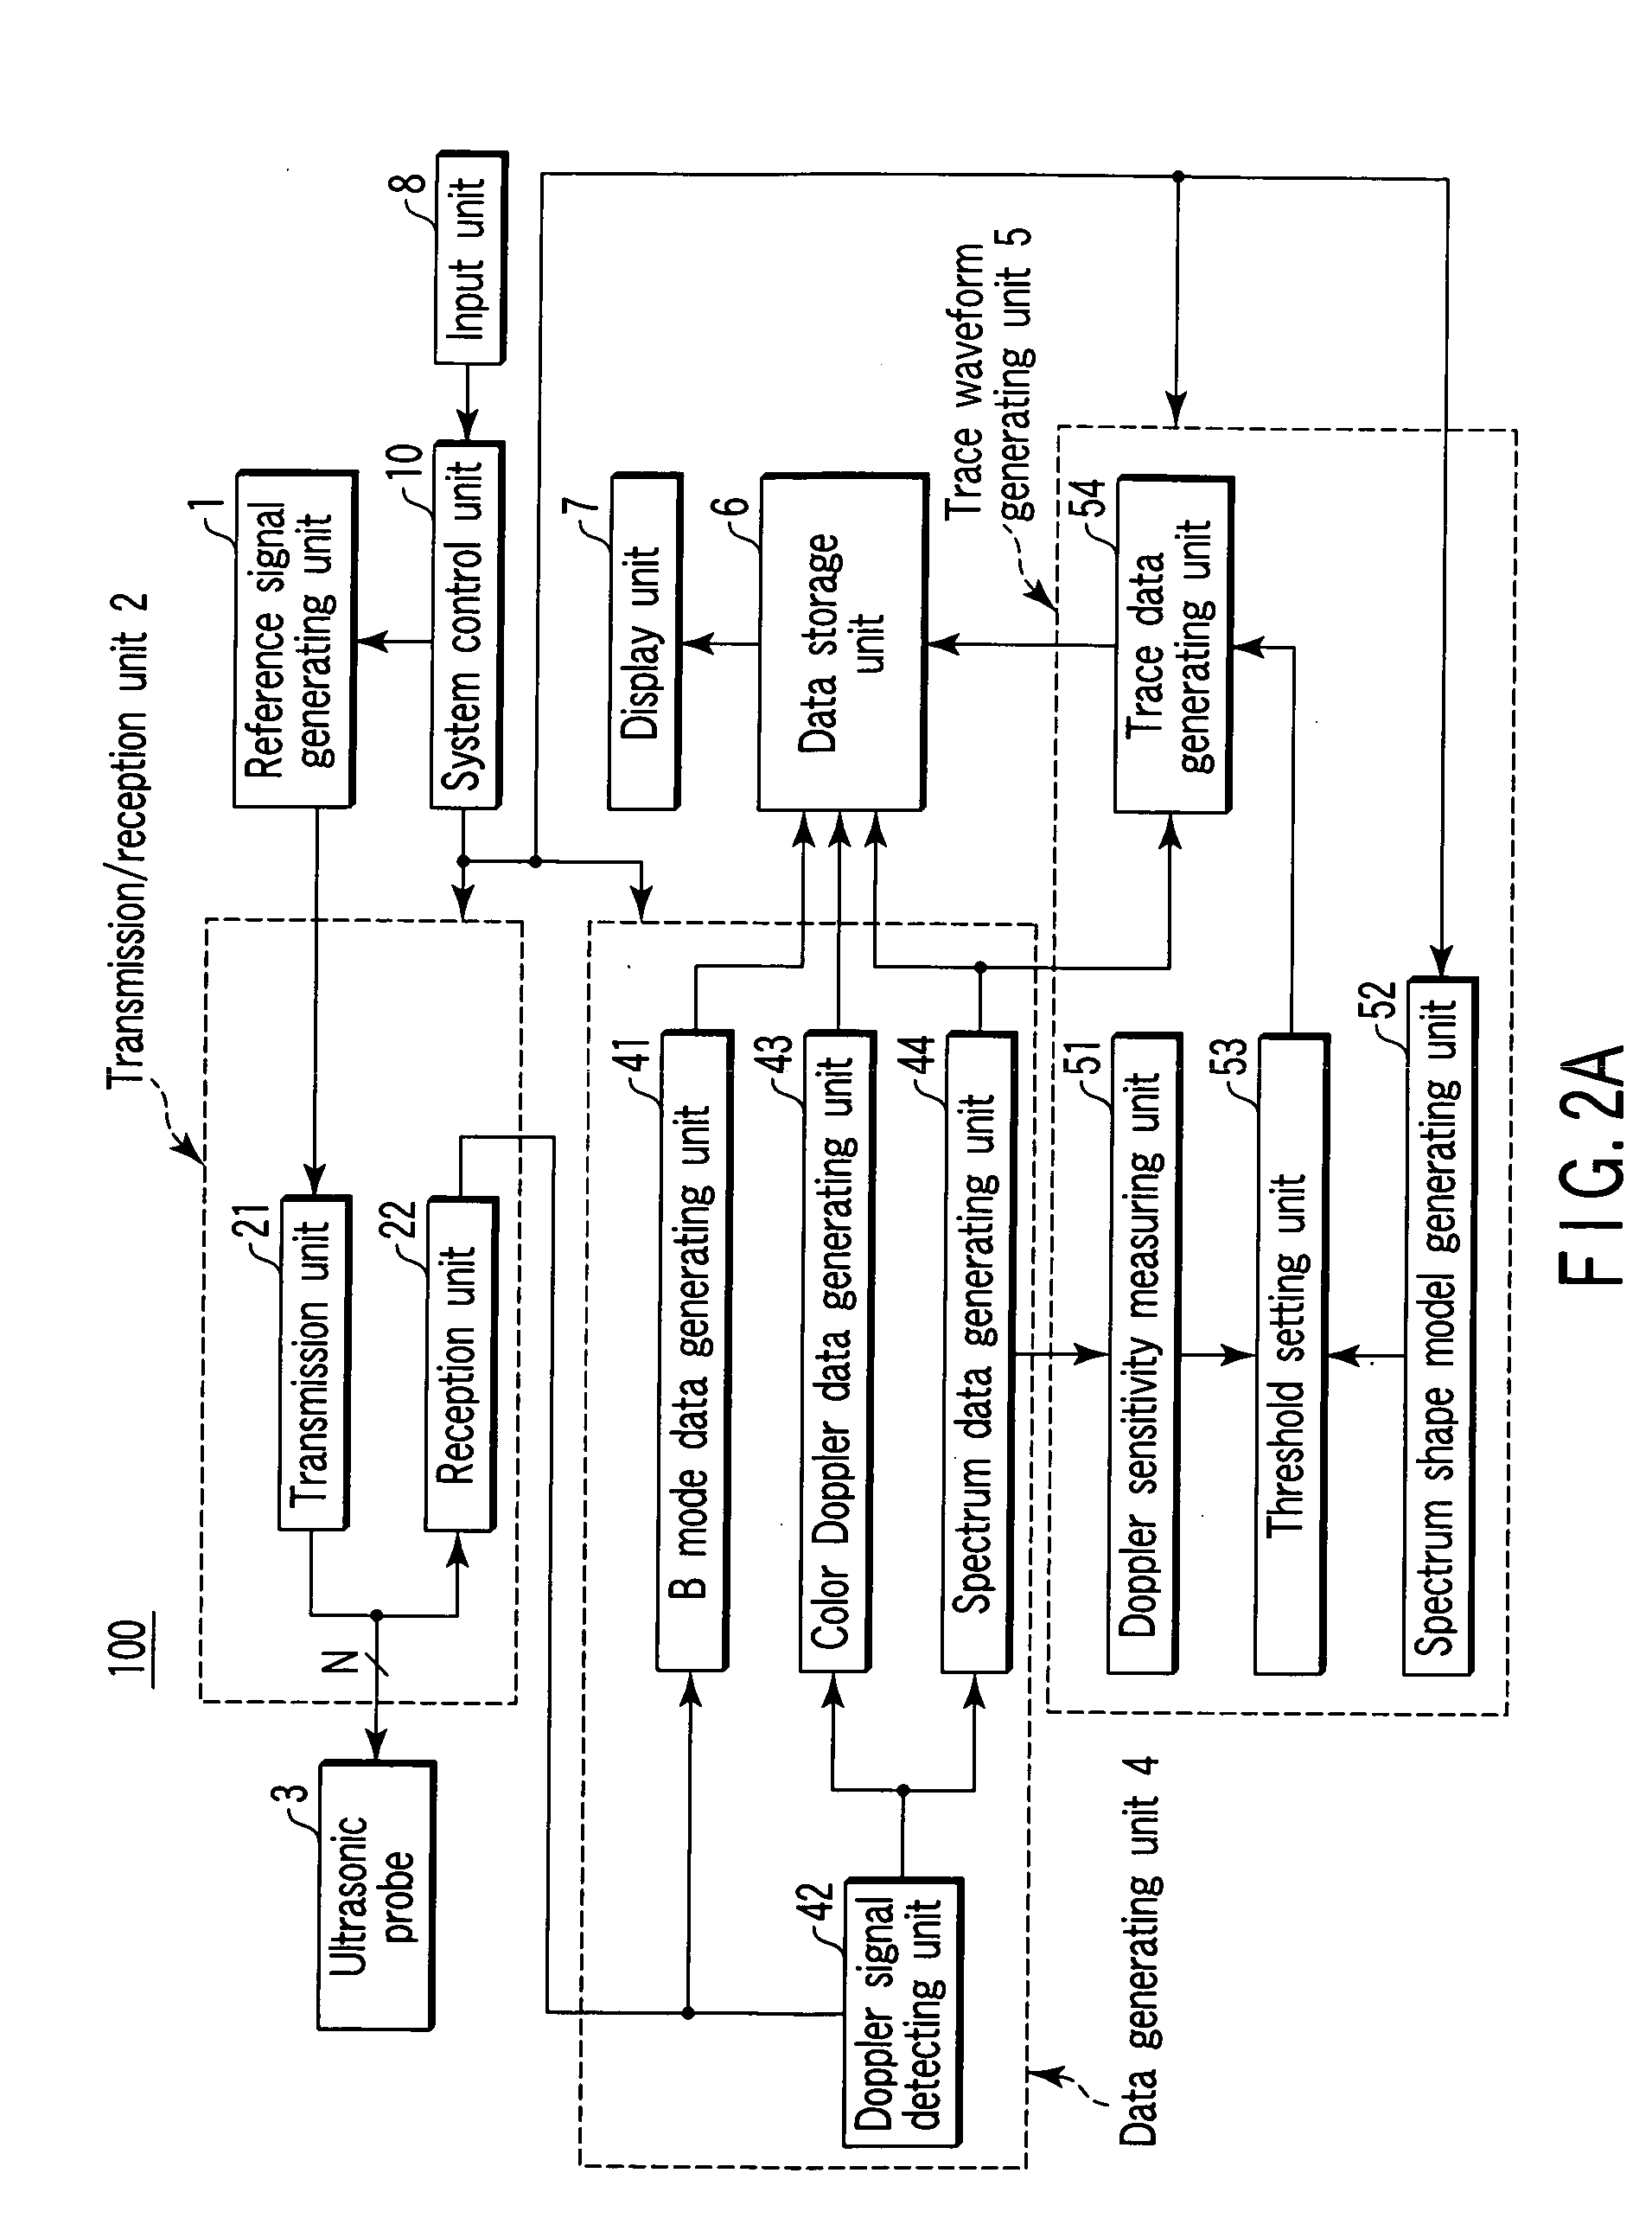 Ultrasonic doppler measuring apparatus and control method therefor